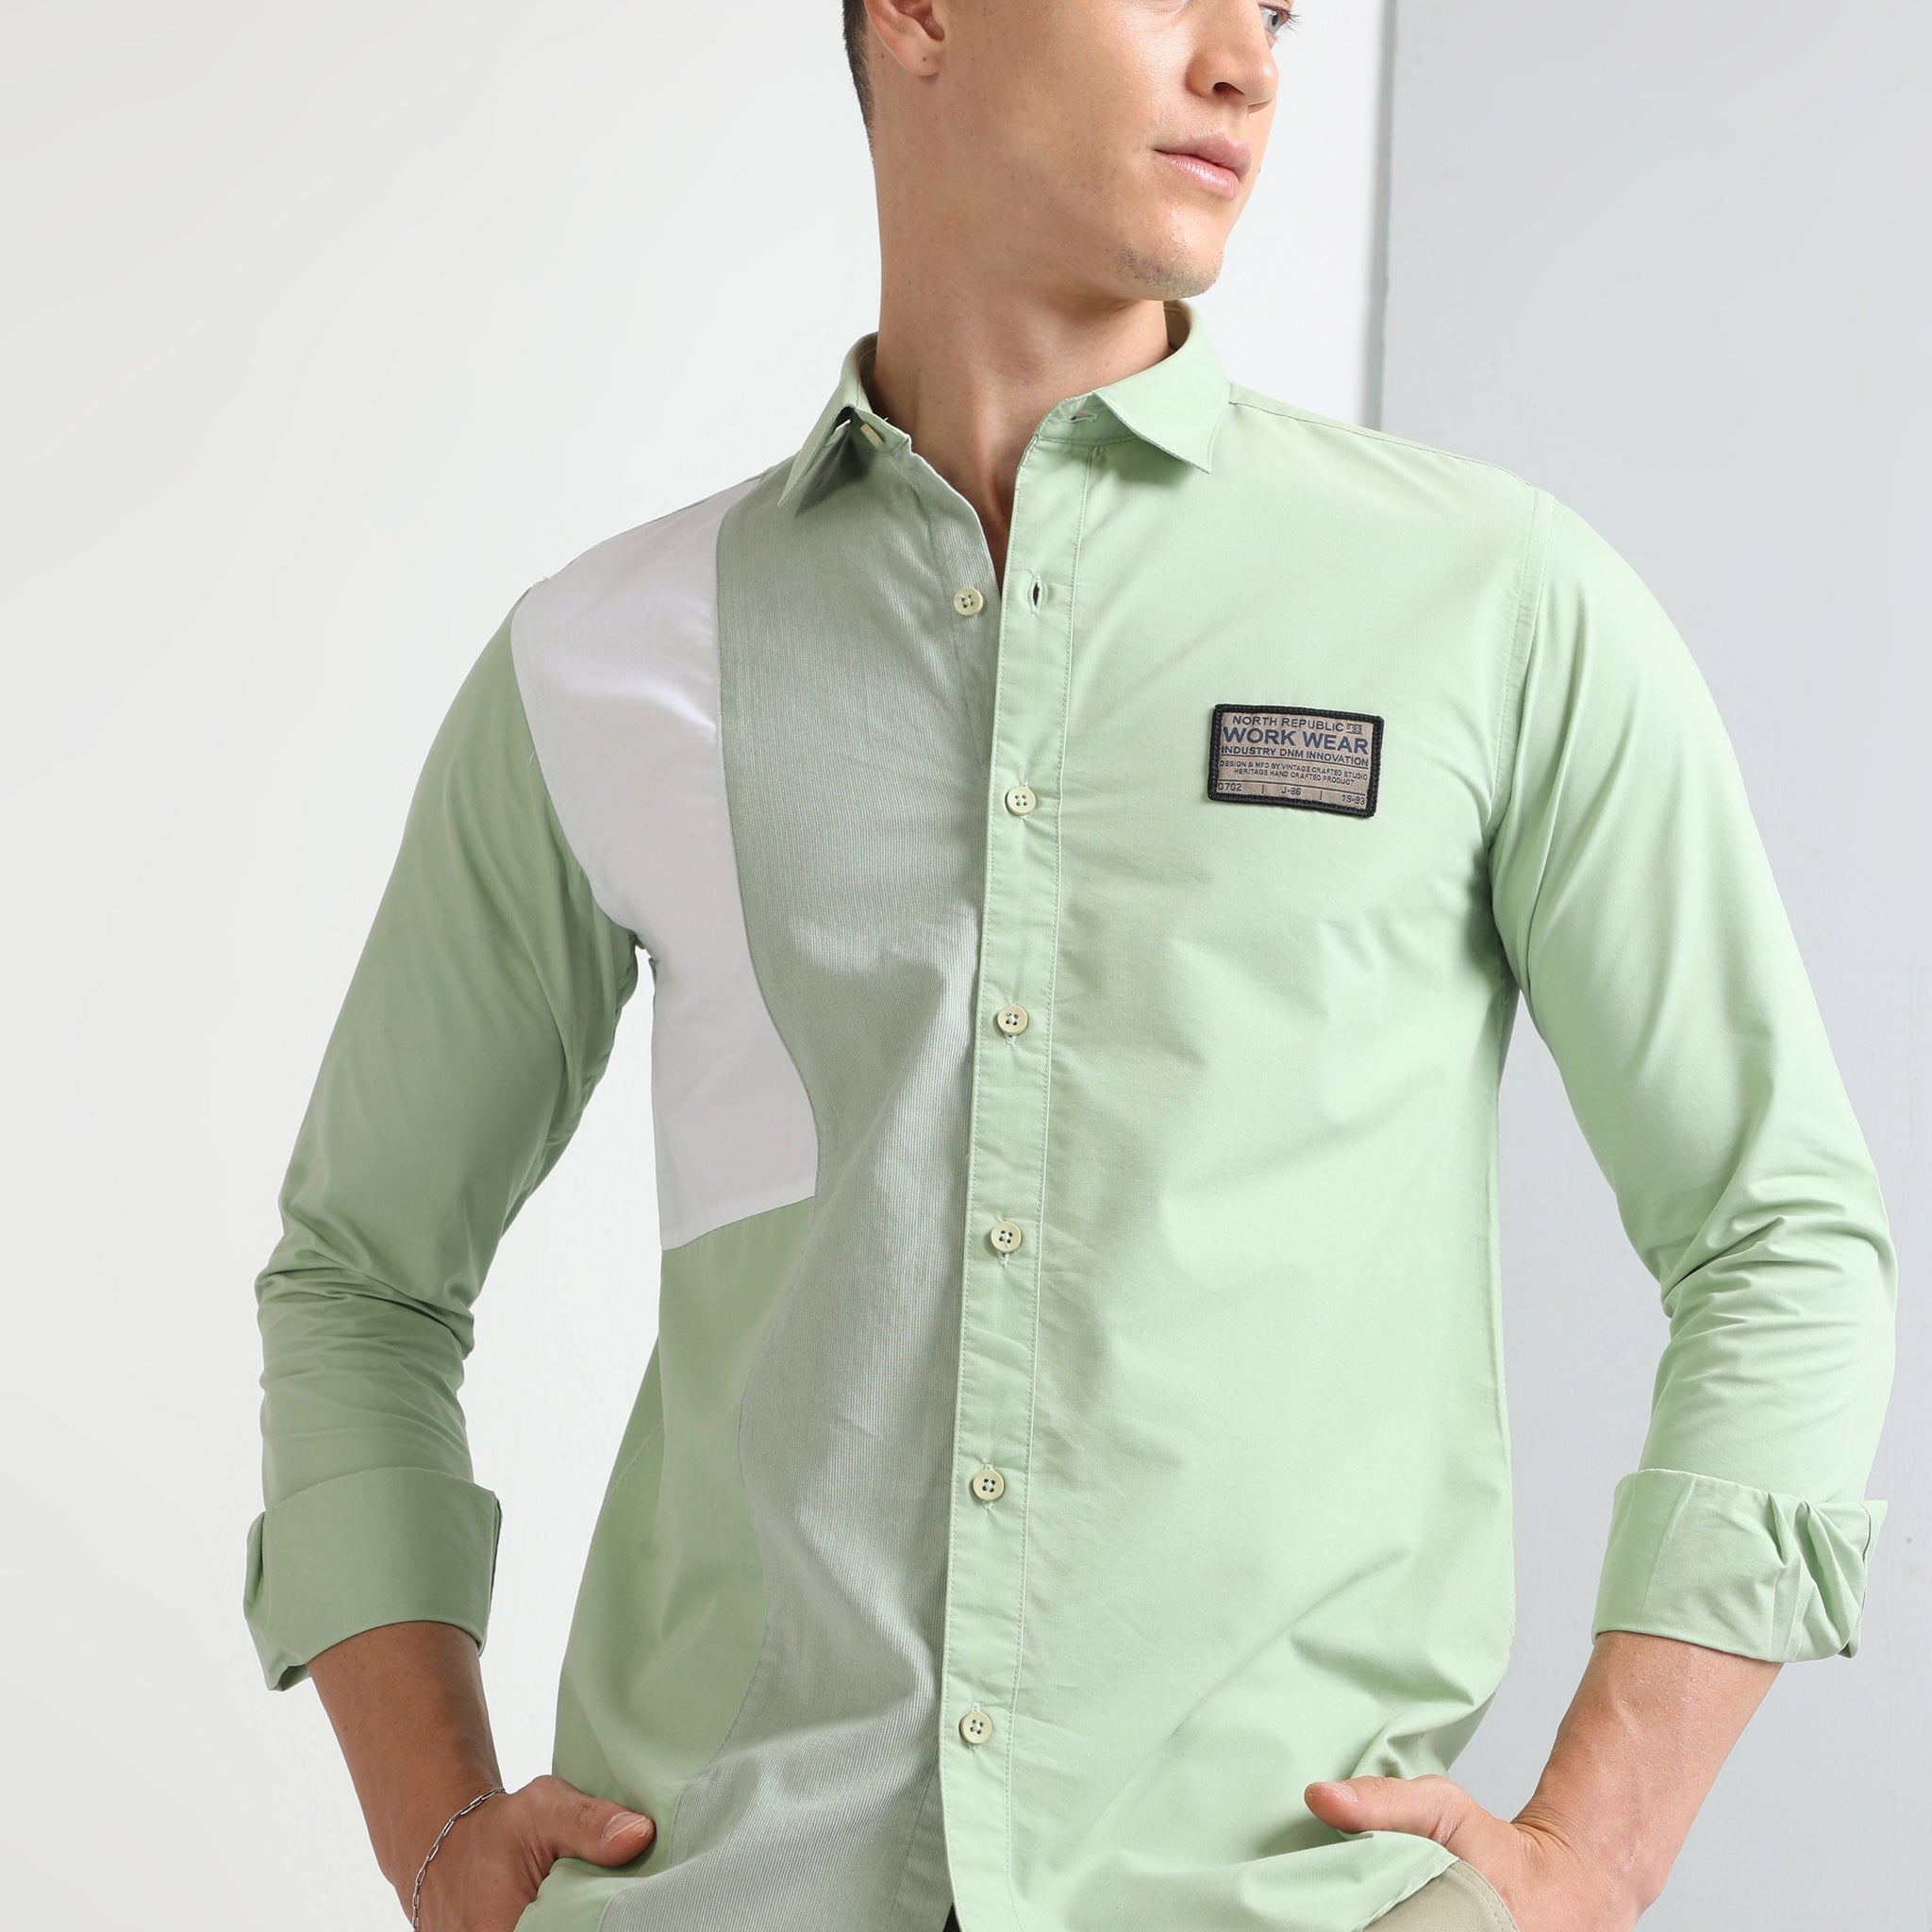 Buy Smart Casual Panel Shirt For Work Wear Online.